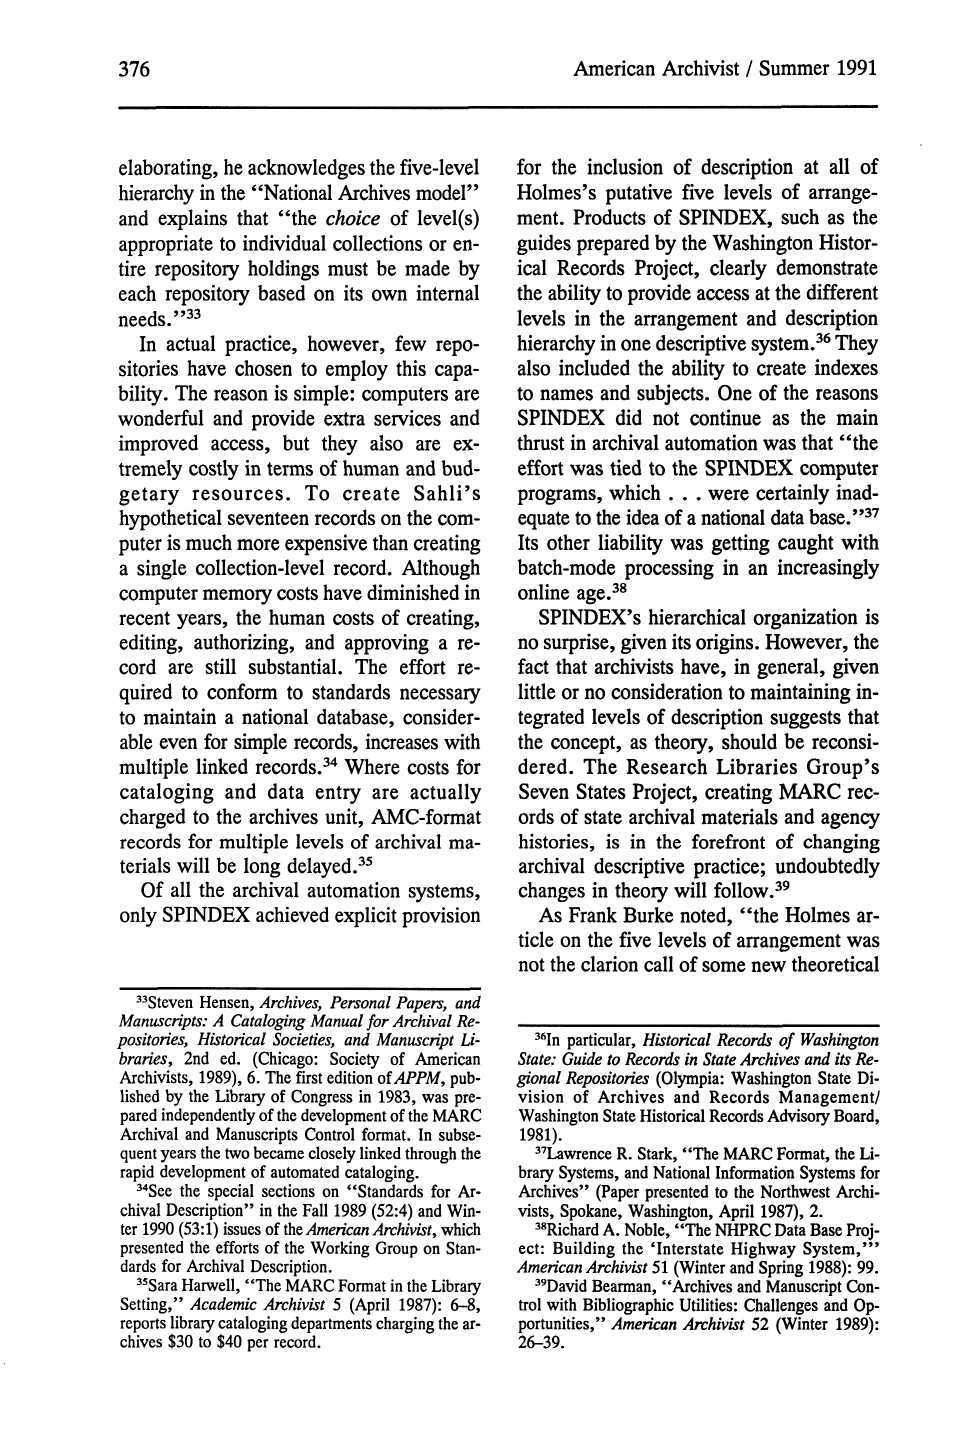 376 American Archivist / Summer 1991 elaborating, he acknowledges the five-level hierarchy in the "National Archives model" and explains that "the choice of level(s) appropriate to individual